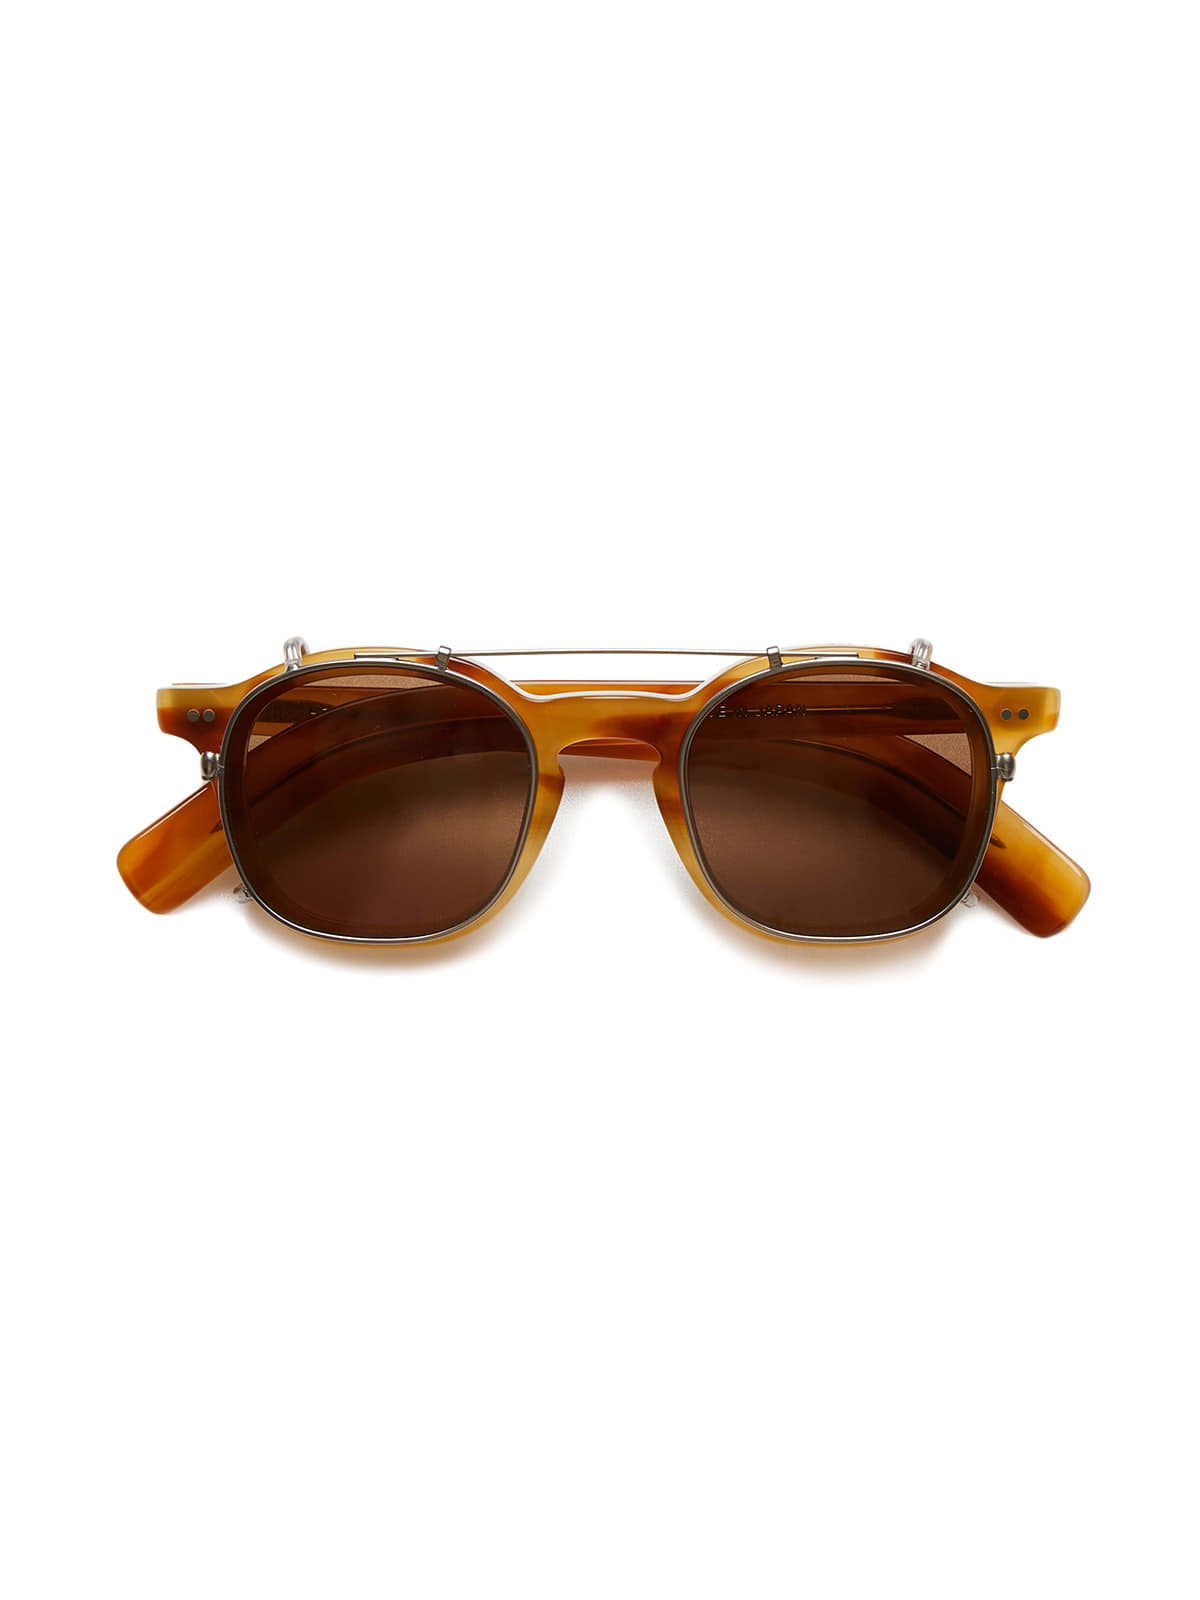 CLIP-ON SUNGLASSES TYPE1 (BROWN)